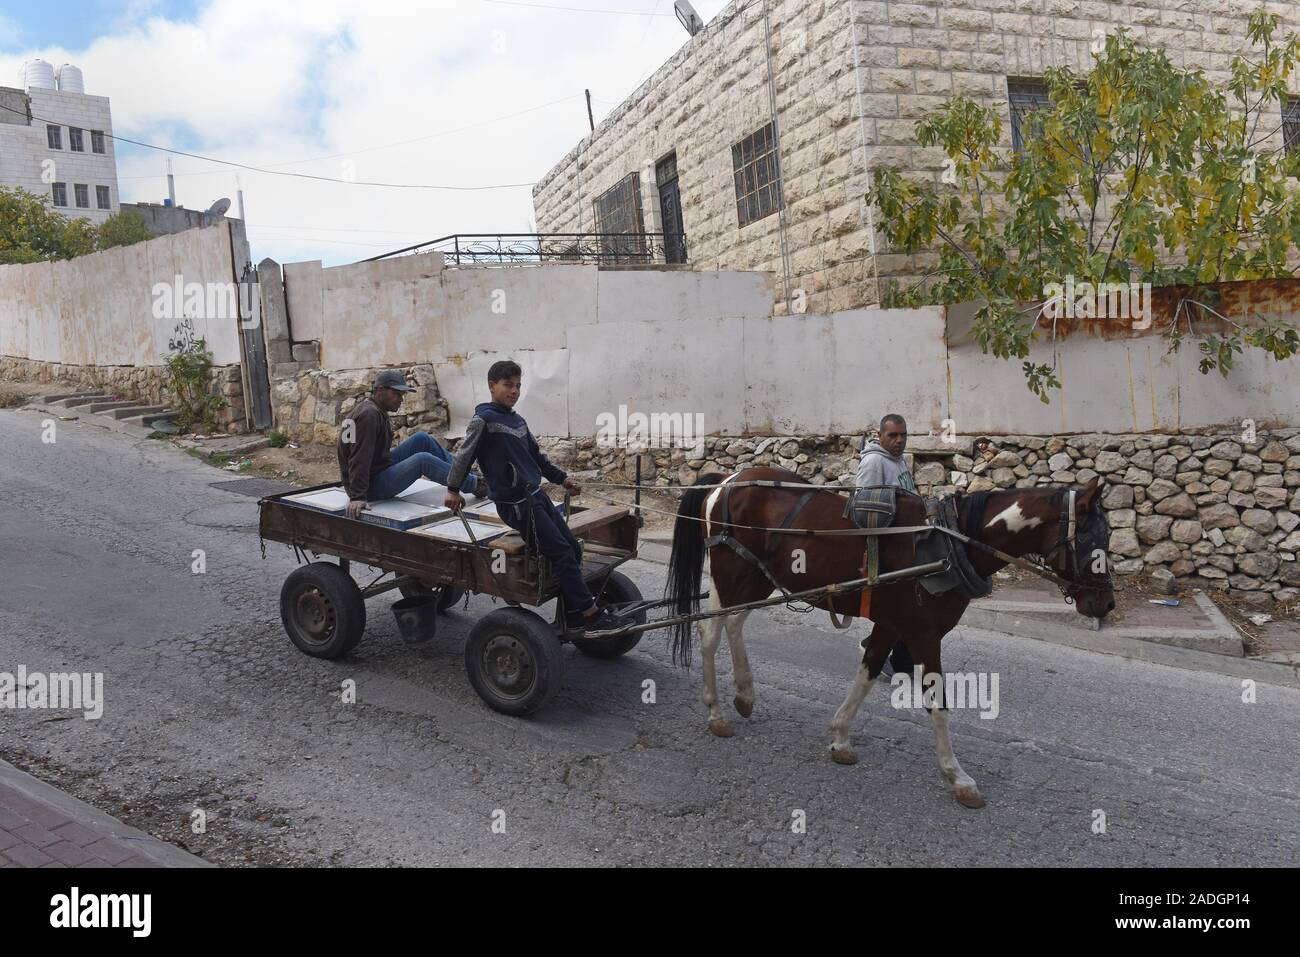 Palestinians transport goods with a horse and cart in the divided city of Hebron, West Bank, on Wednesday, December 4, 2019. Israeli Defense Minister Naftali Bennett ordered officials to start planning a new Jewish settlement in the heart of Hebron, which Palestinian officials say is a result of U.S. President Donald Trump's decision to legitimize settlements.  Photo by Debbie Hill/UPI Stock Photo